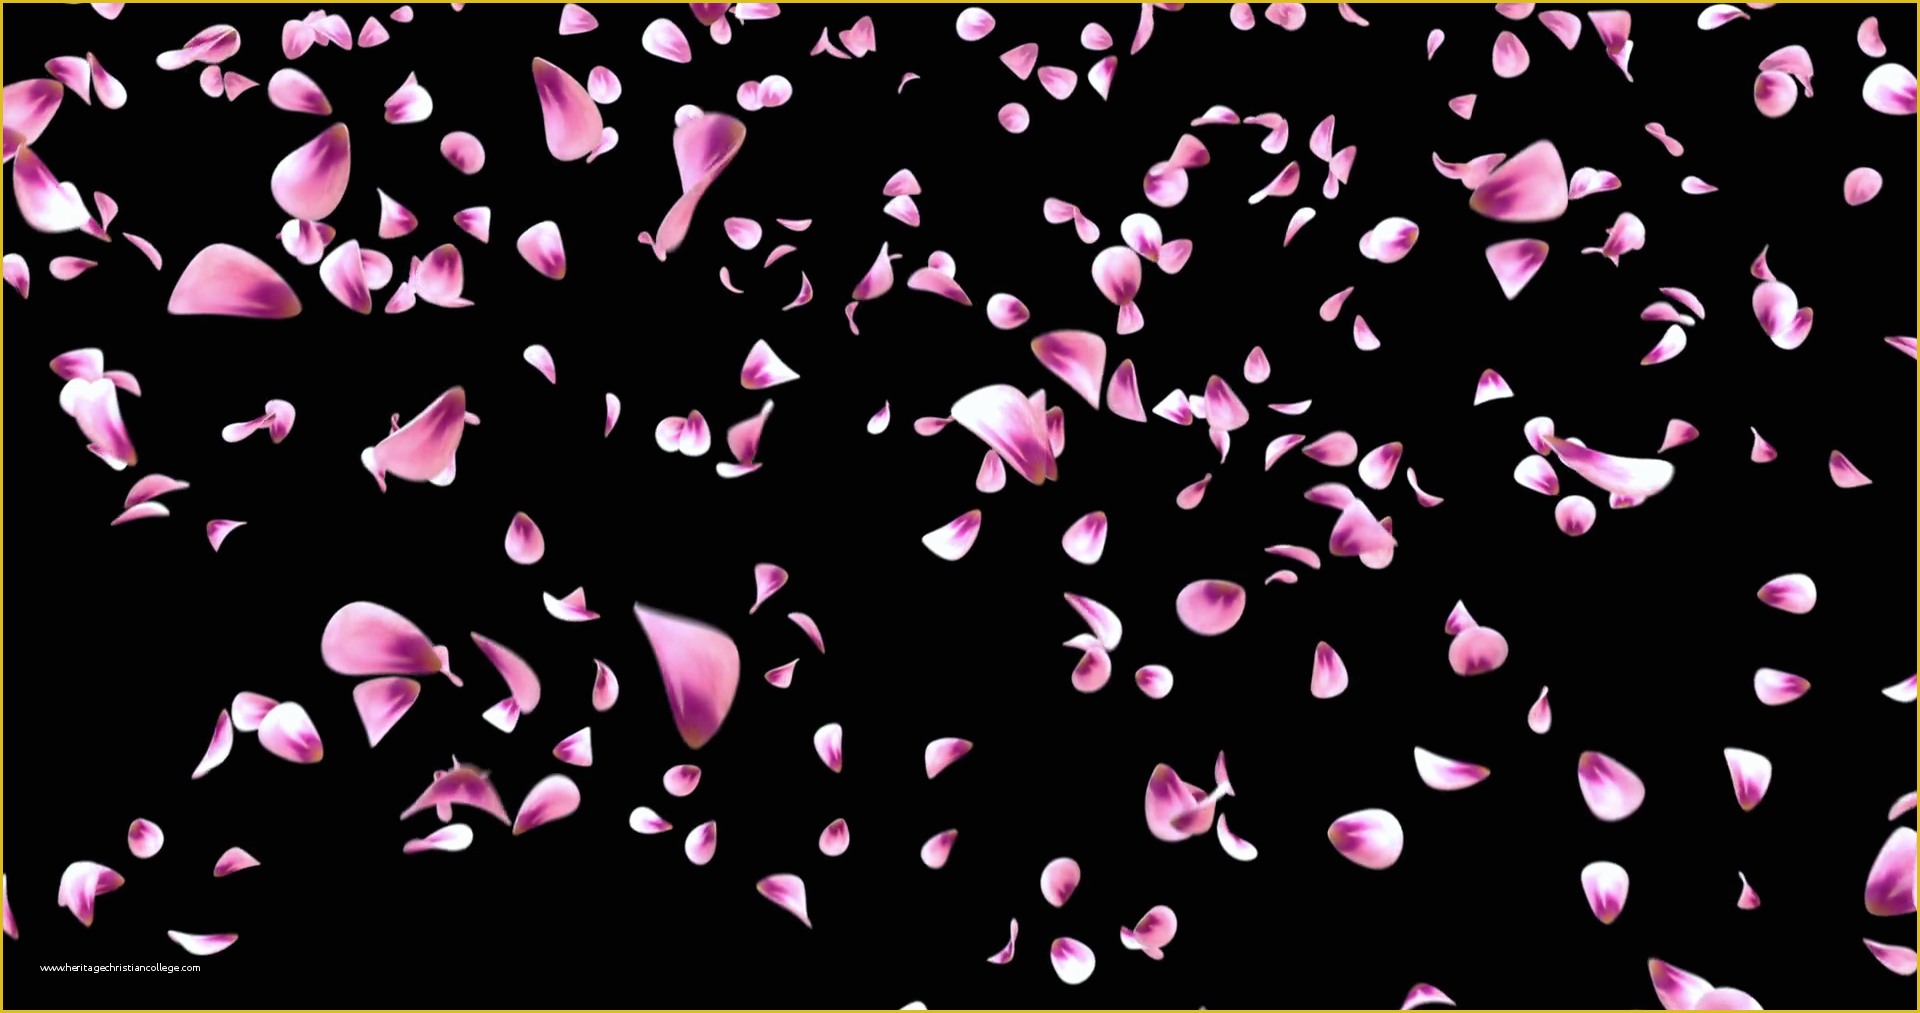 Falling Flower Petals after Effects Template Free Of Flying Red Pink Rose Sakura Flower Petals Falling